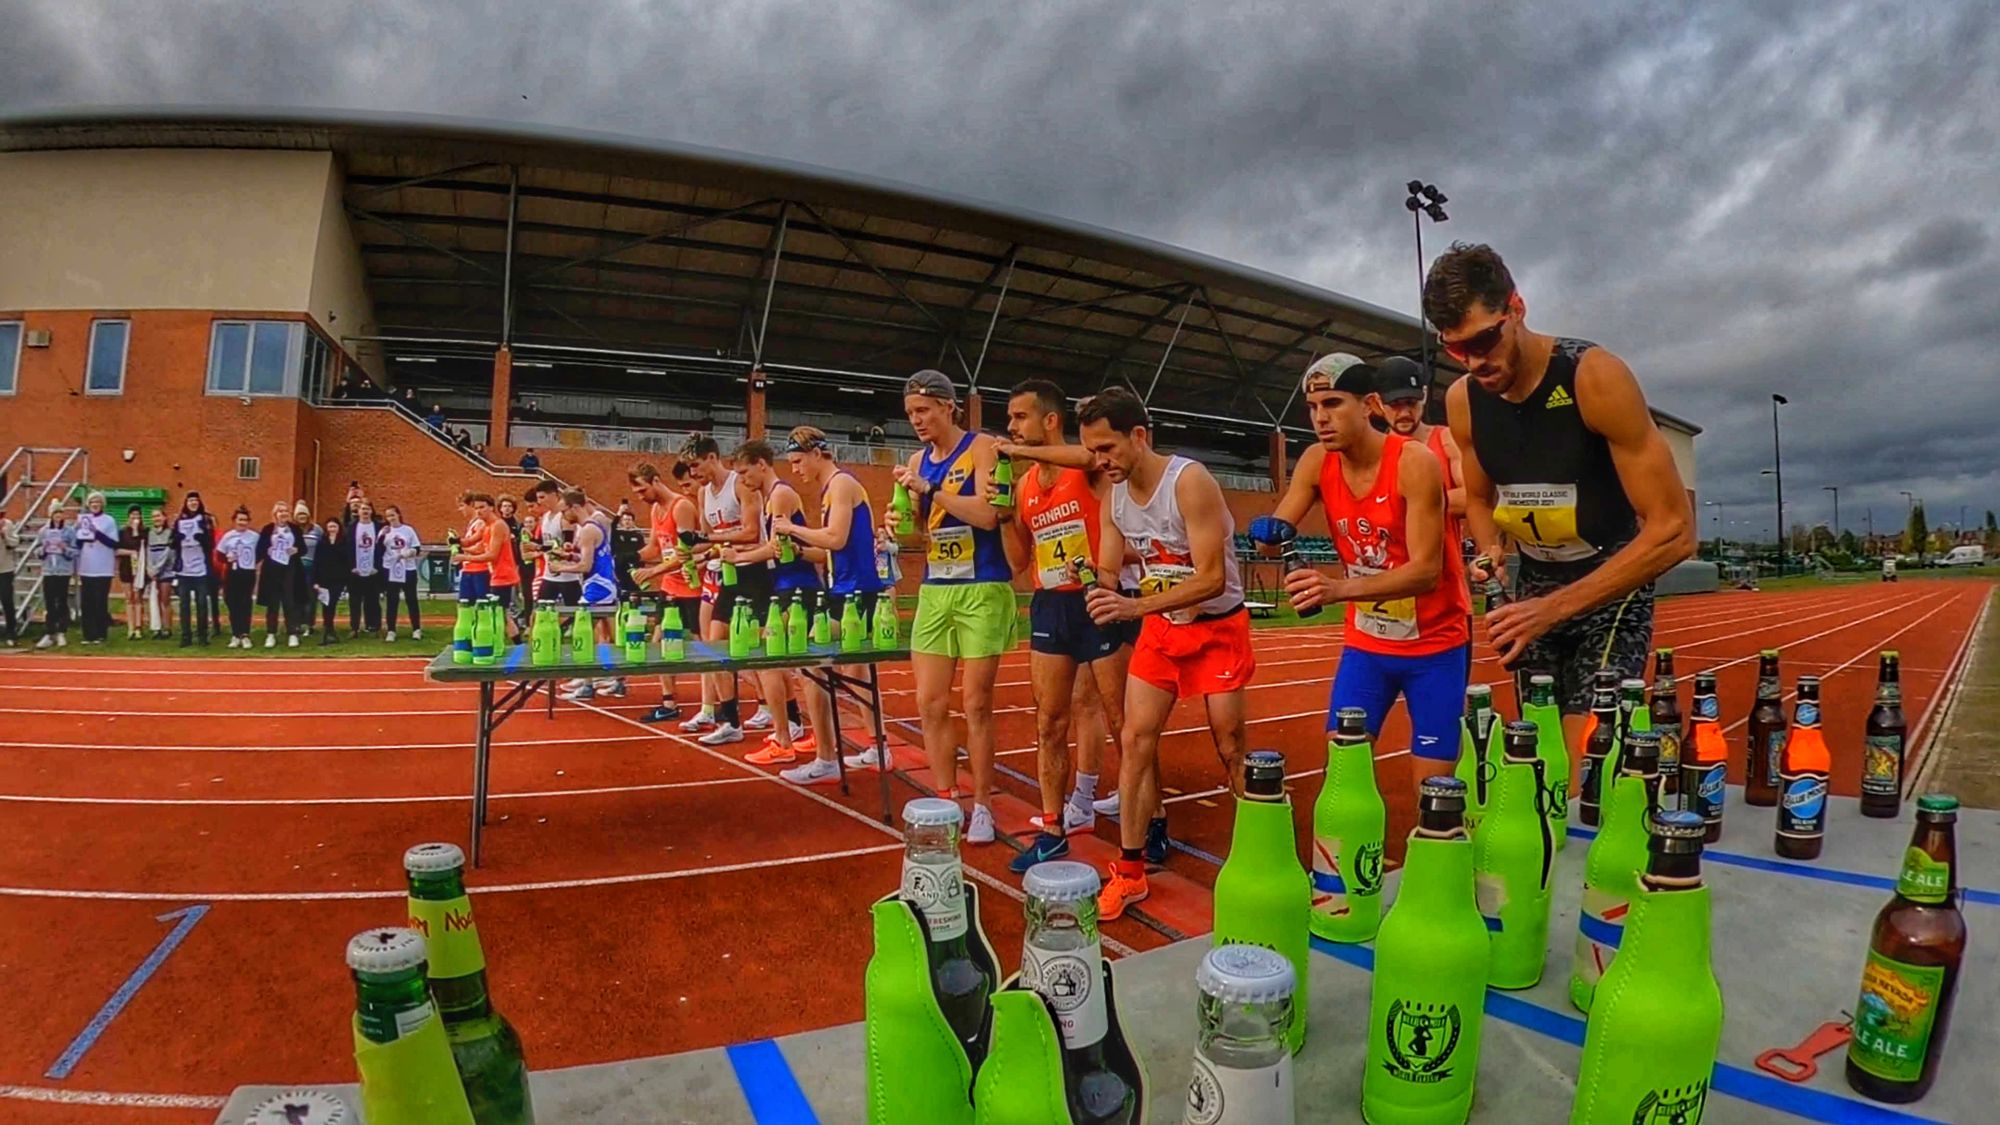 Start of the Men's Championship at the 2021 Beer Mile World Classic